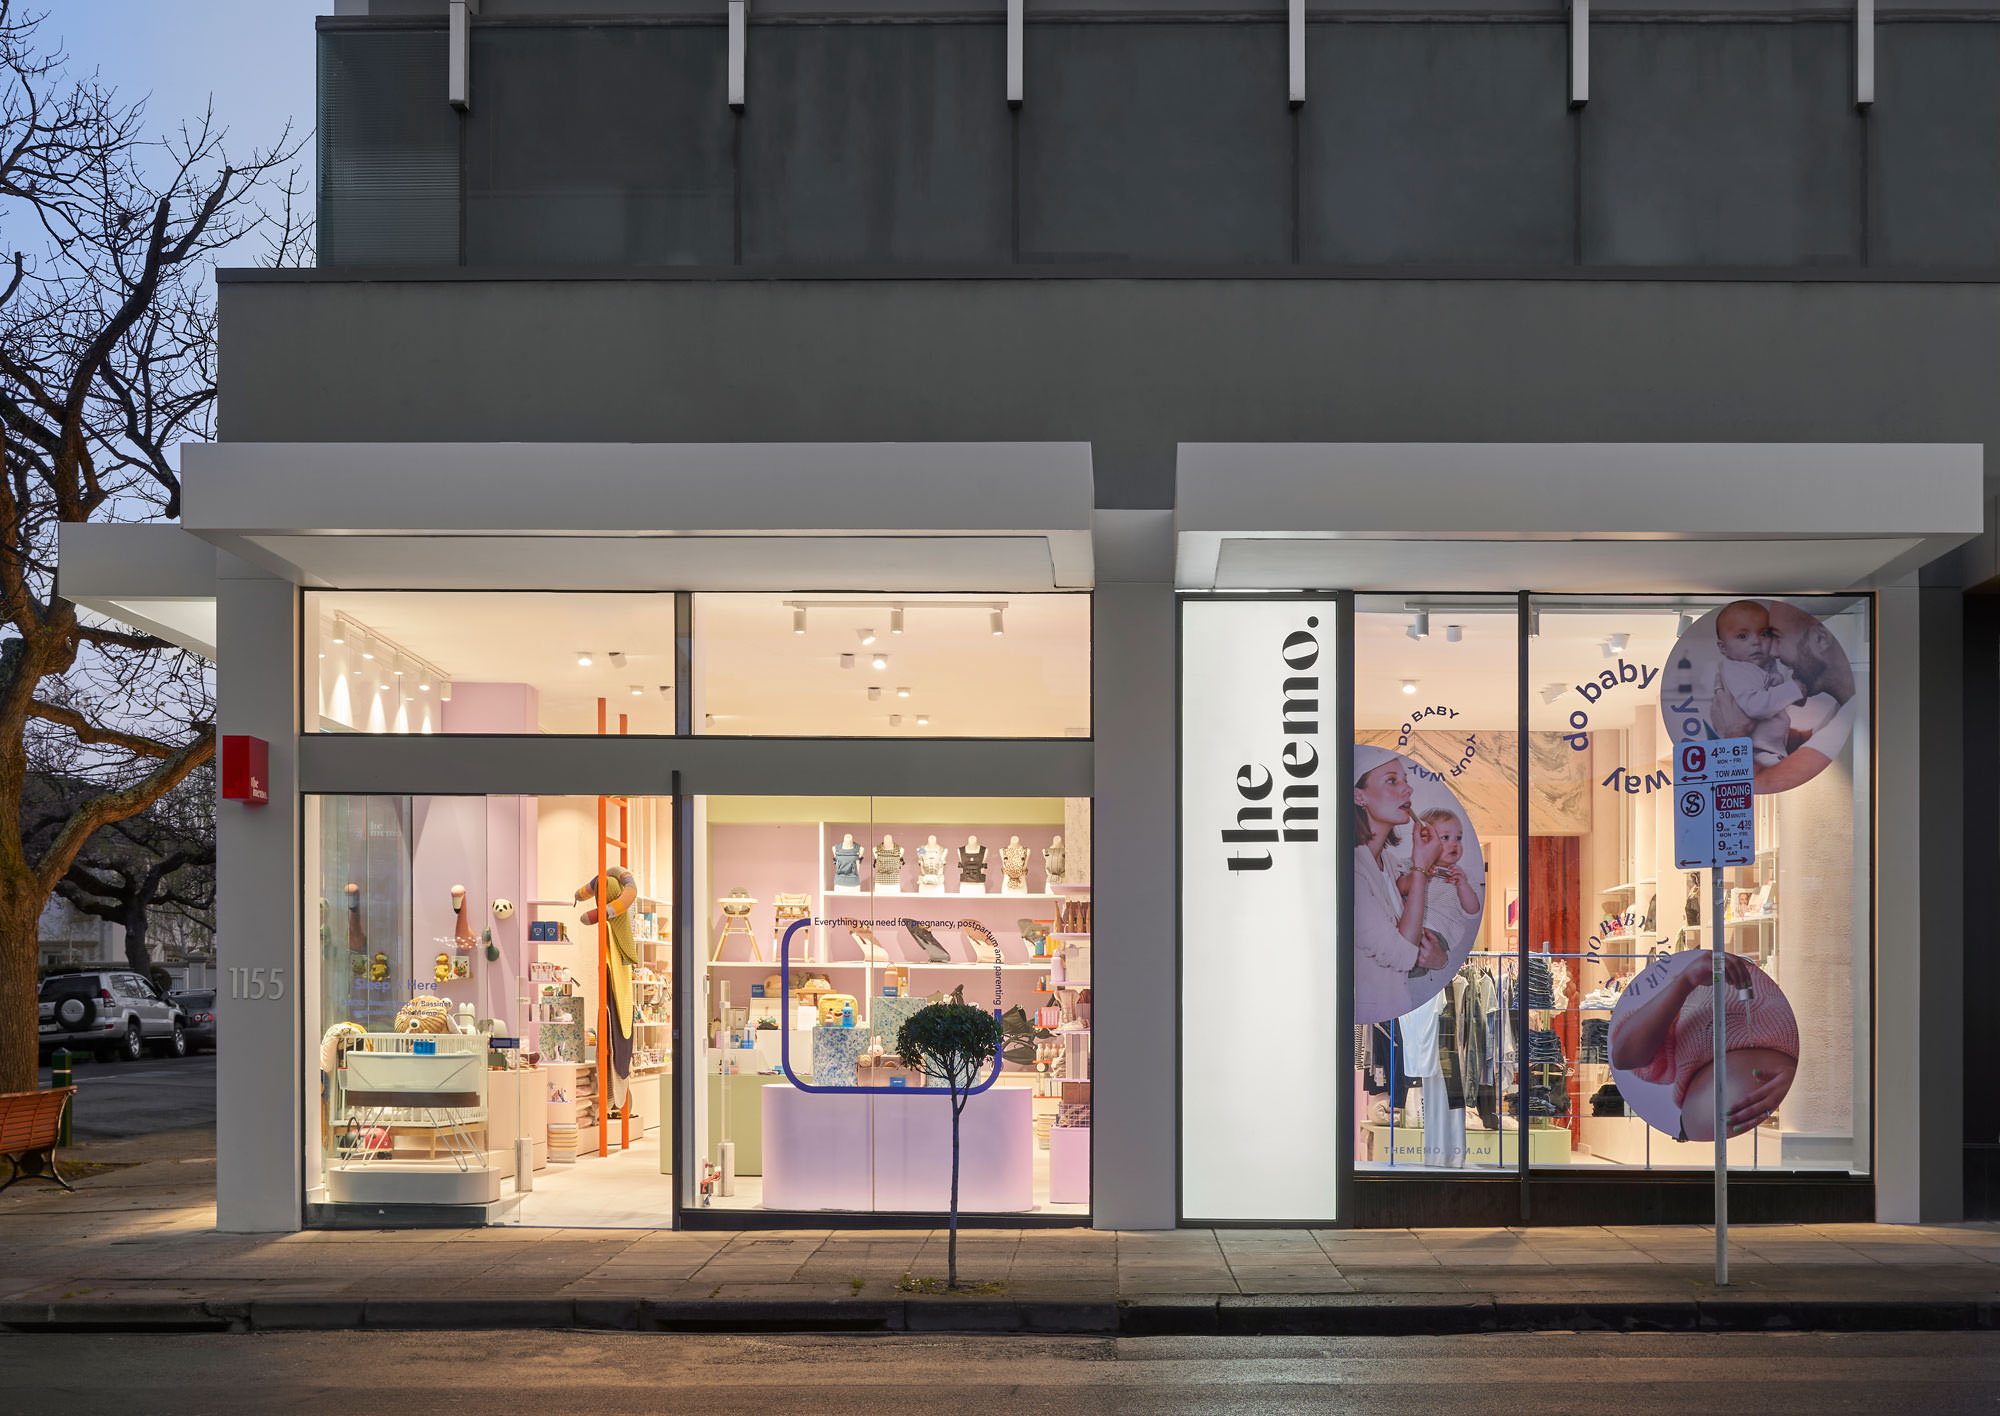 The Memo flagship boutique in Armadale, Melbourne, designed by Cera Stribley. Photography by Damien Kook